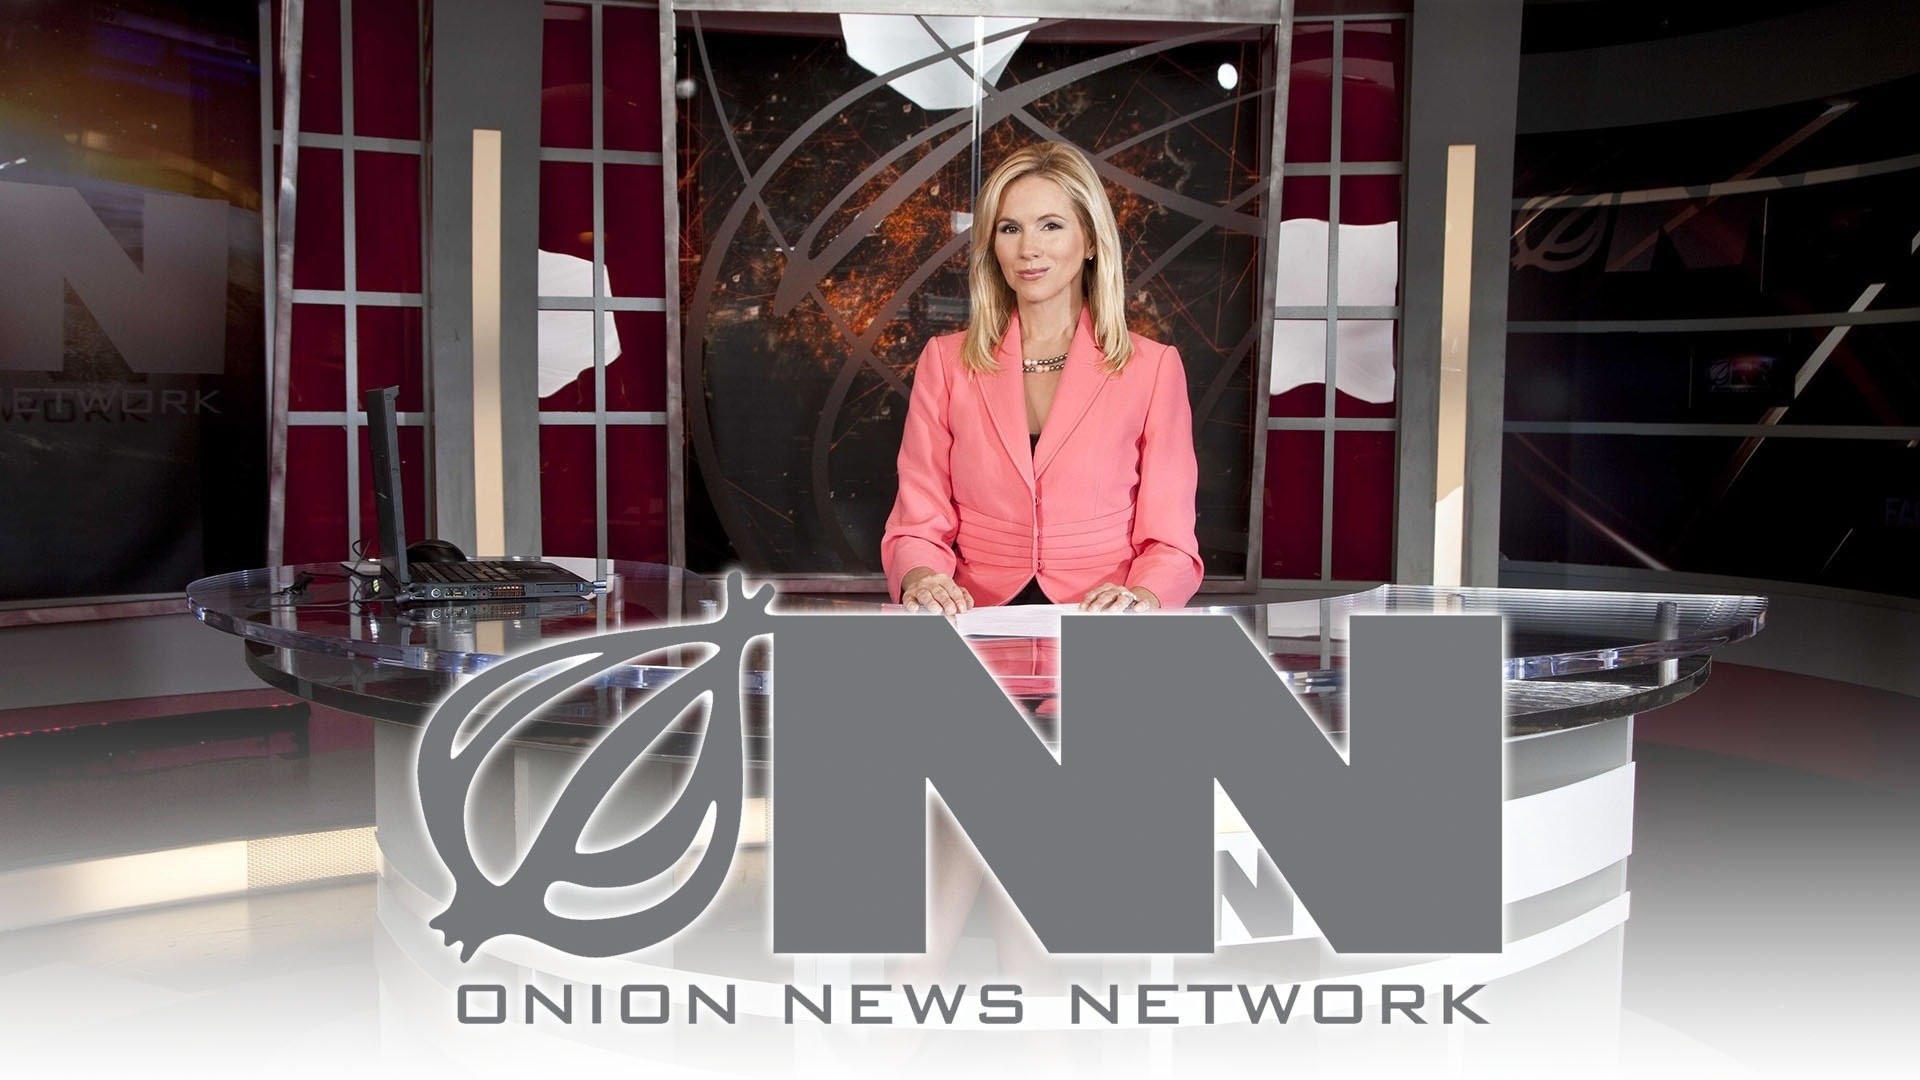 Onion News Network Review, Onion TV Show